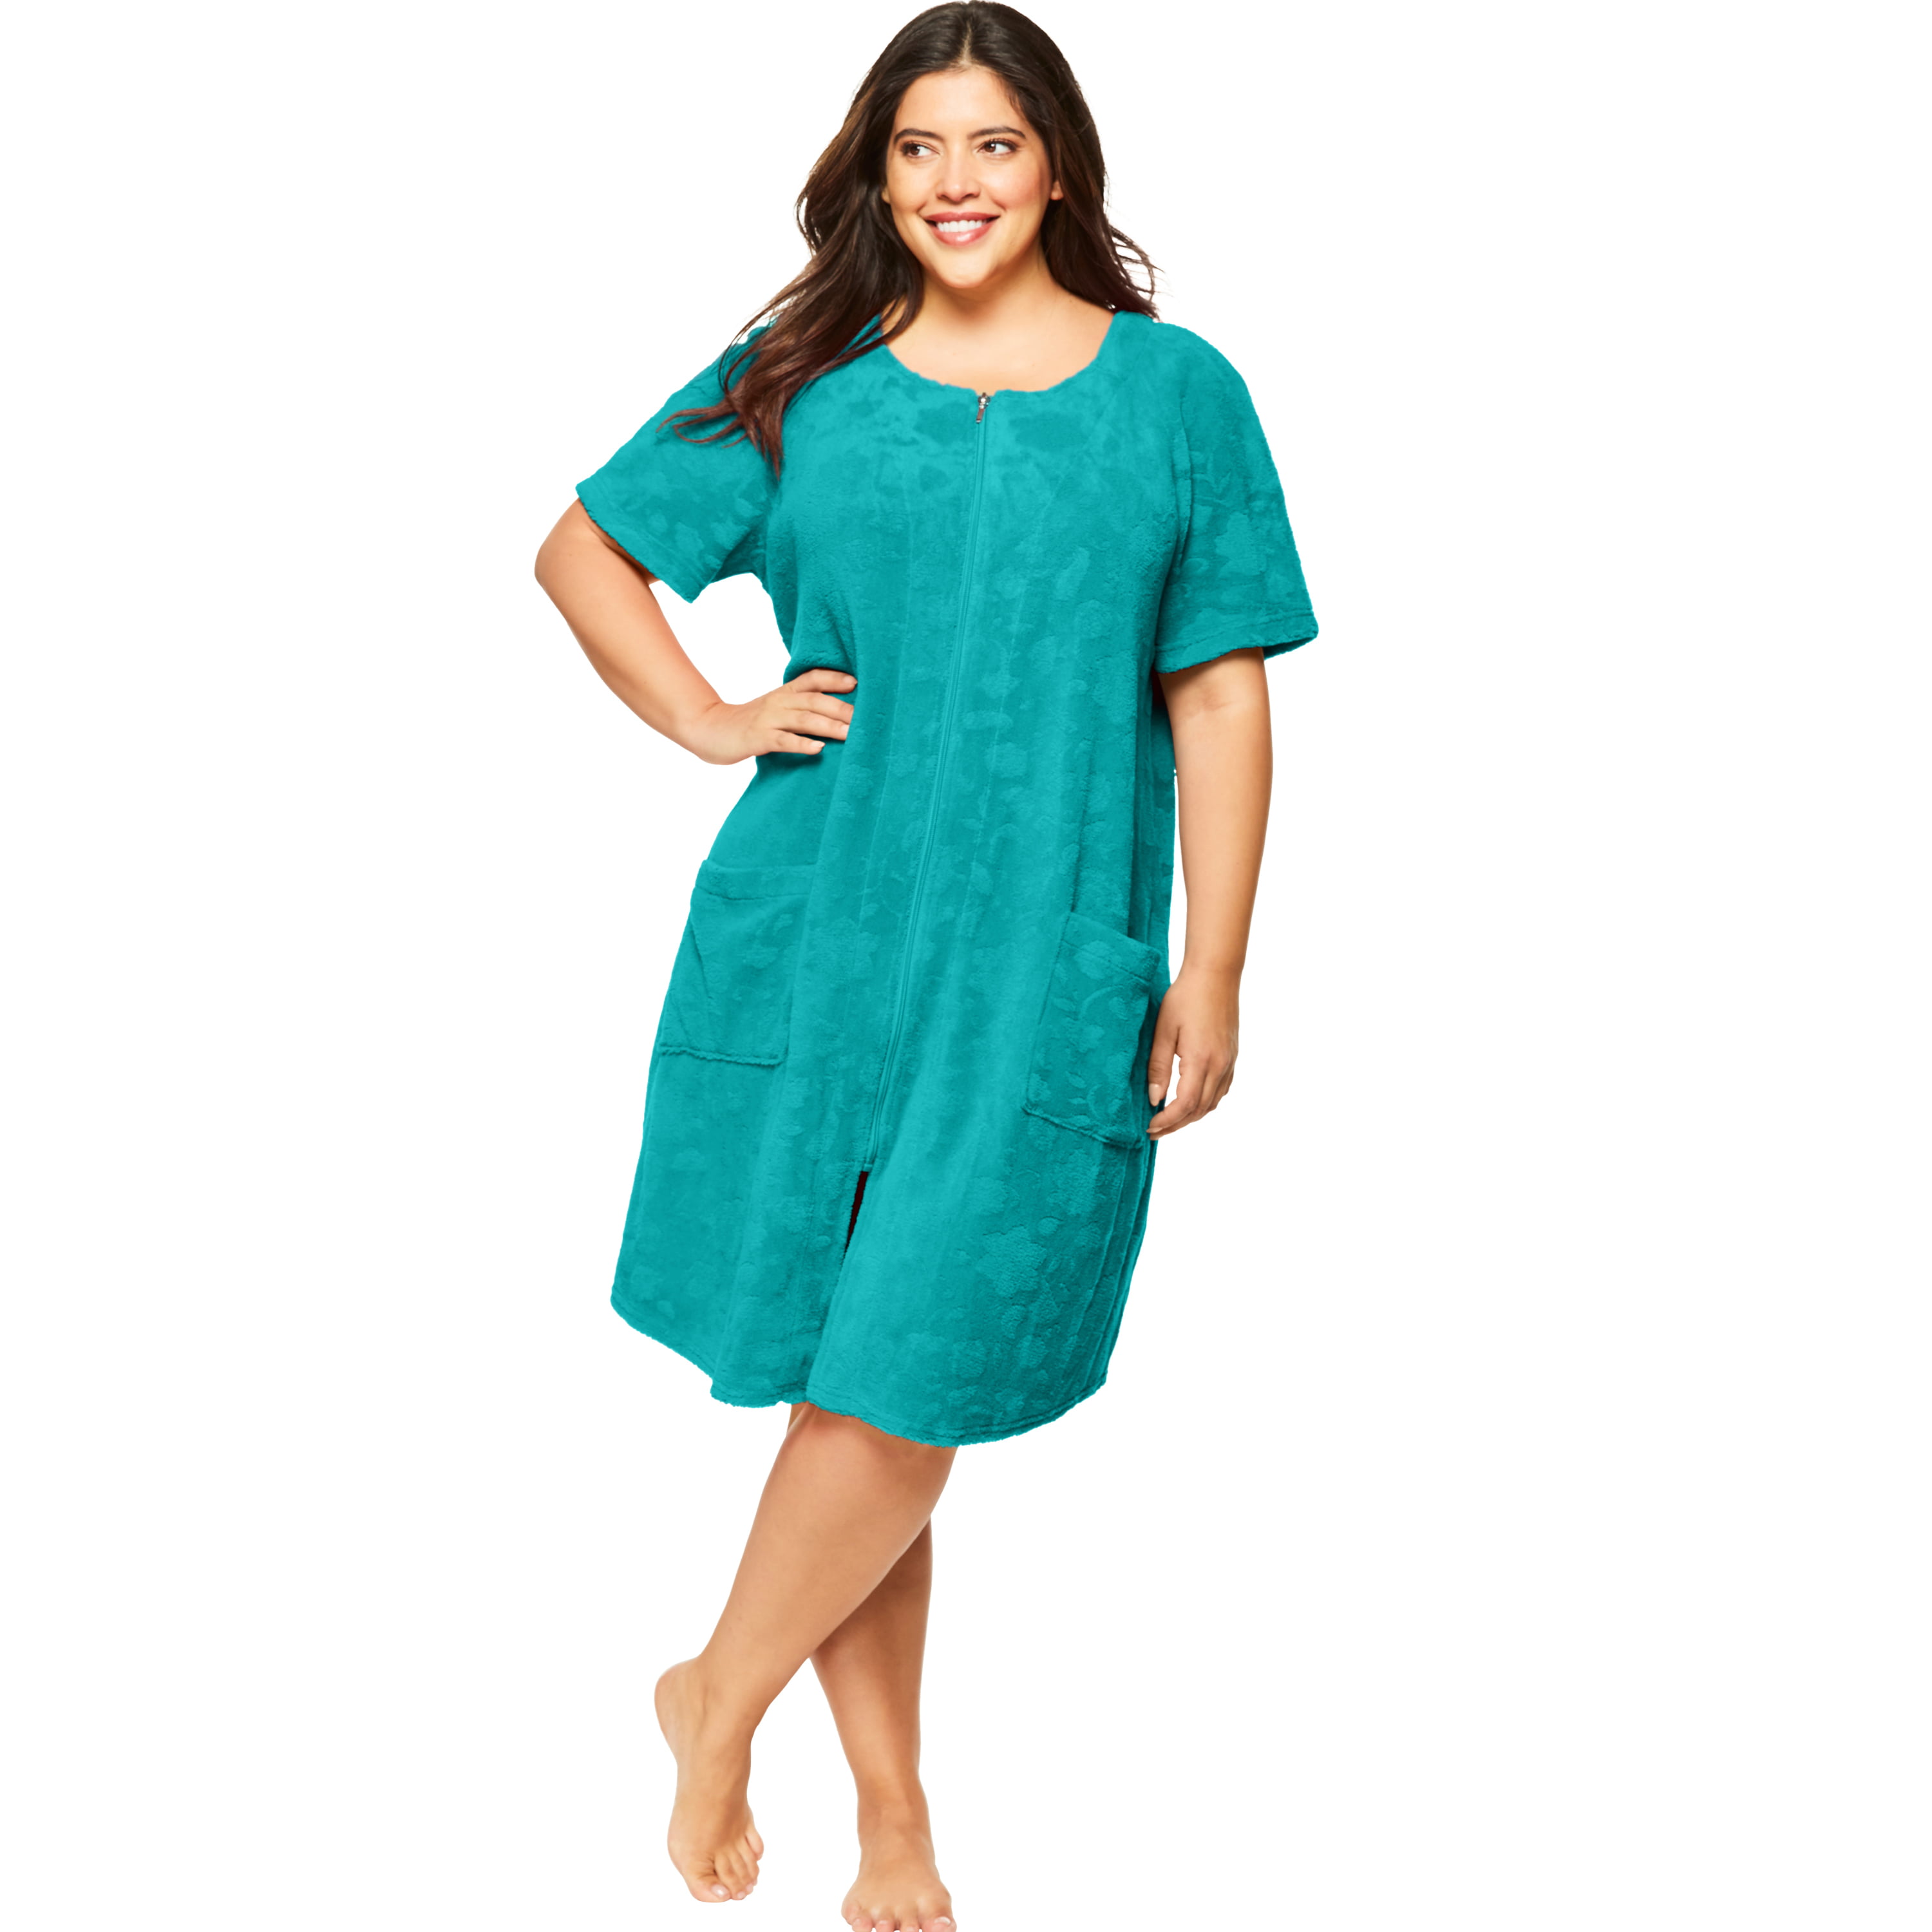 Womens Plus Size Zip-Front Embossed Terry Robe Dreams & Co